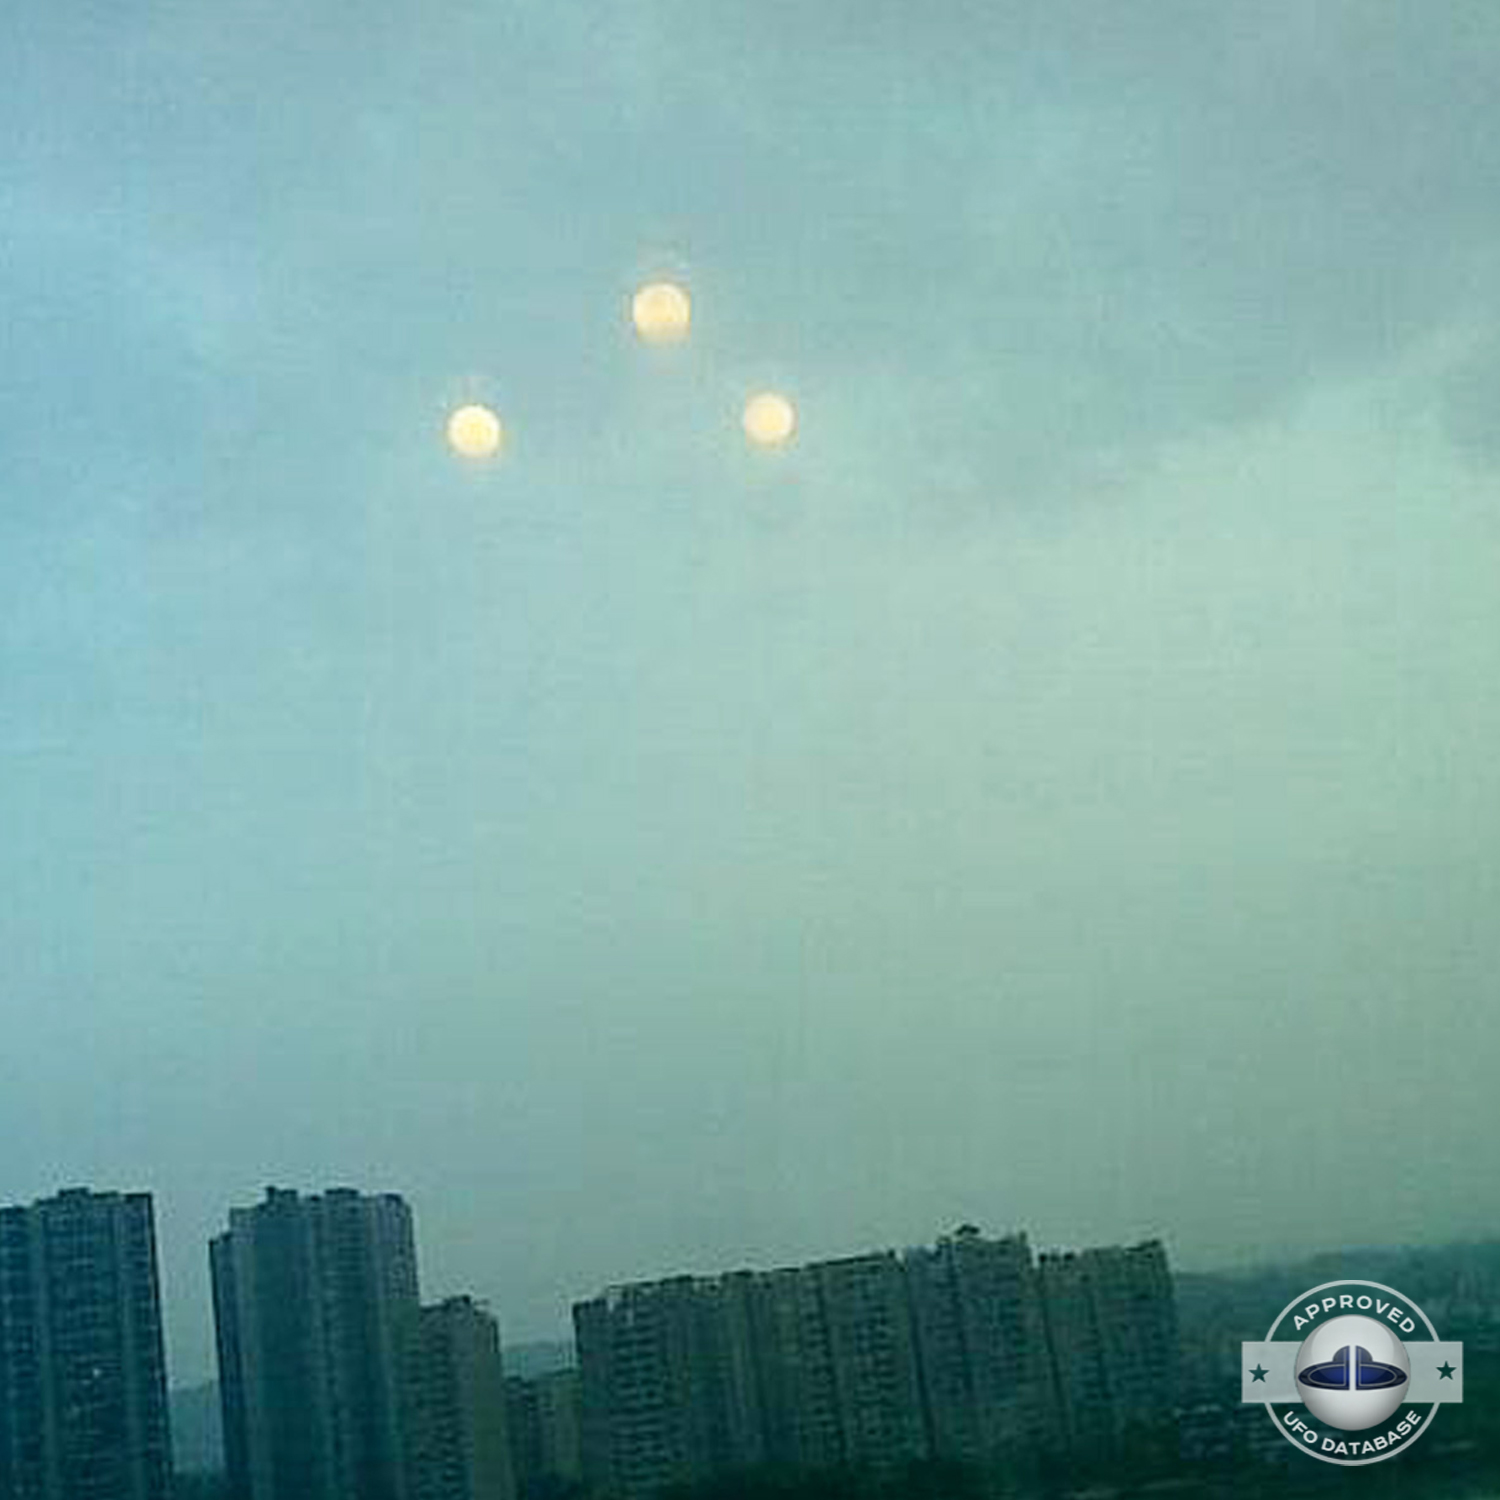 Citizens of Leshan saw 3 illuminated spherical shaped UFO in the sky UFO Picture #158-2